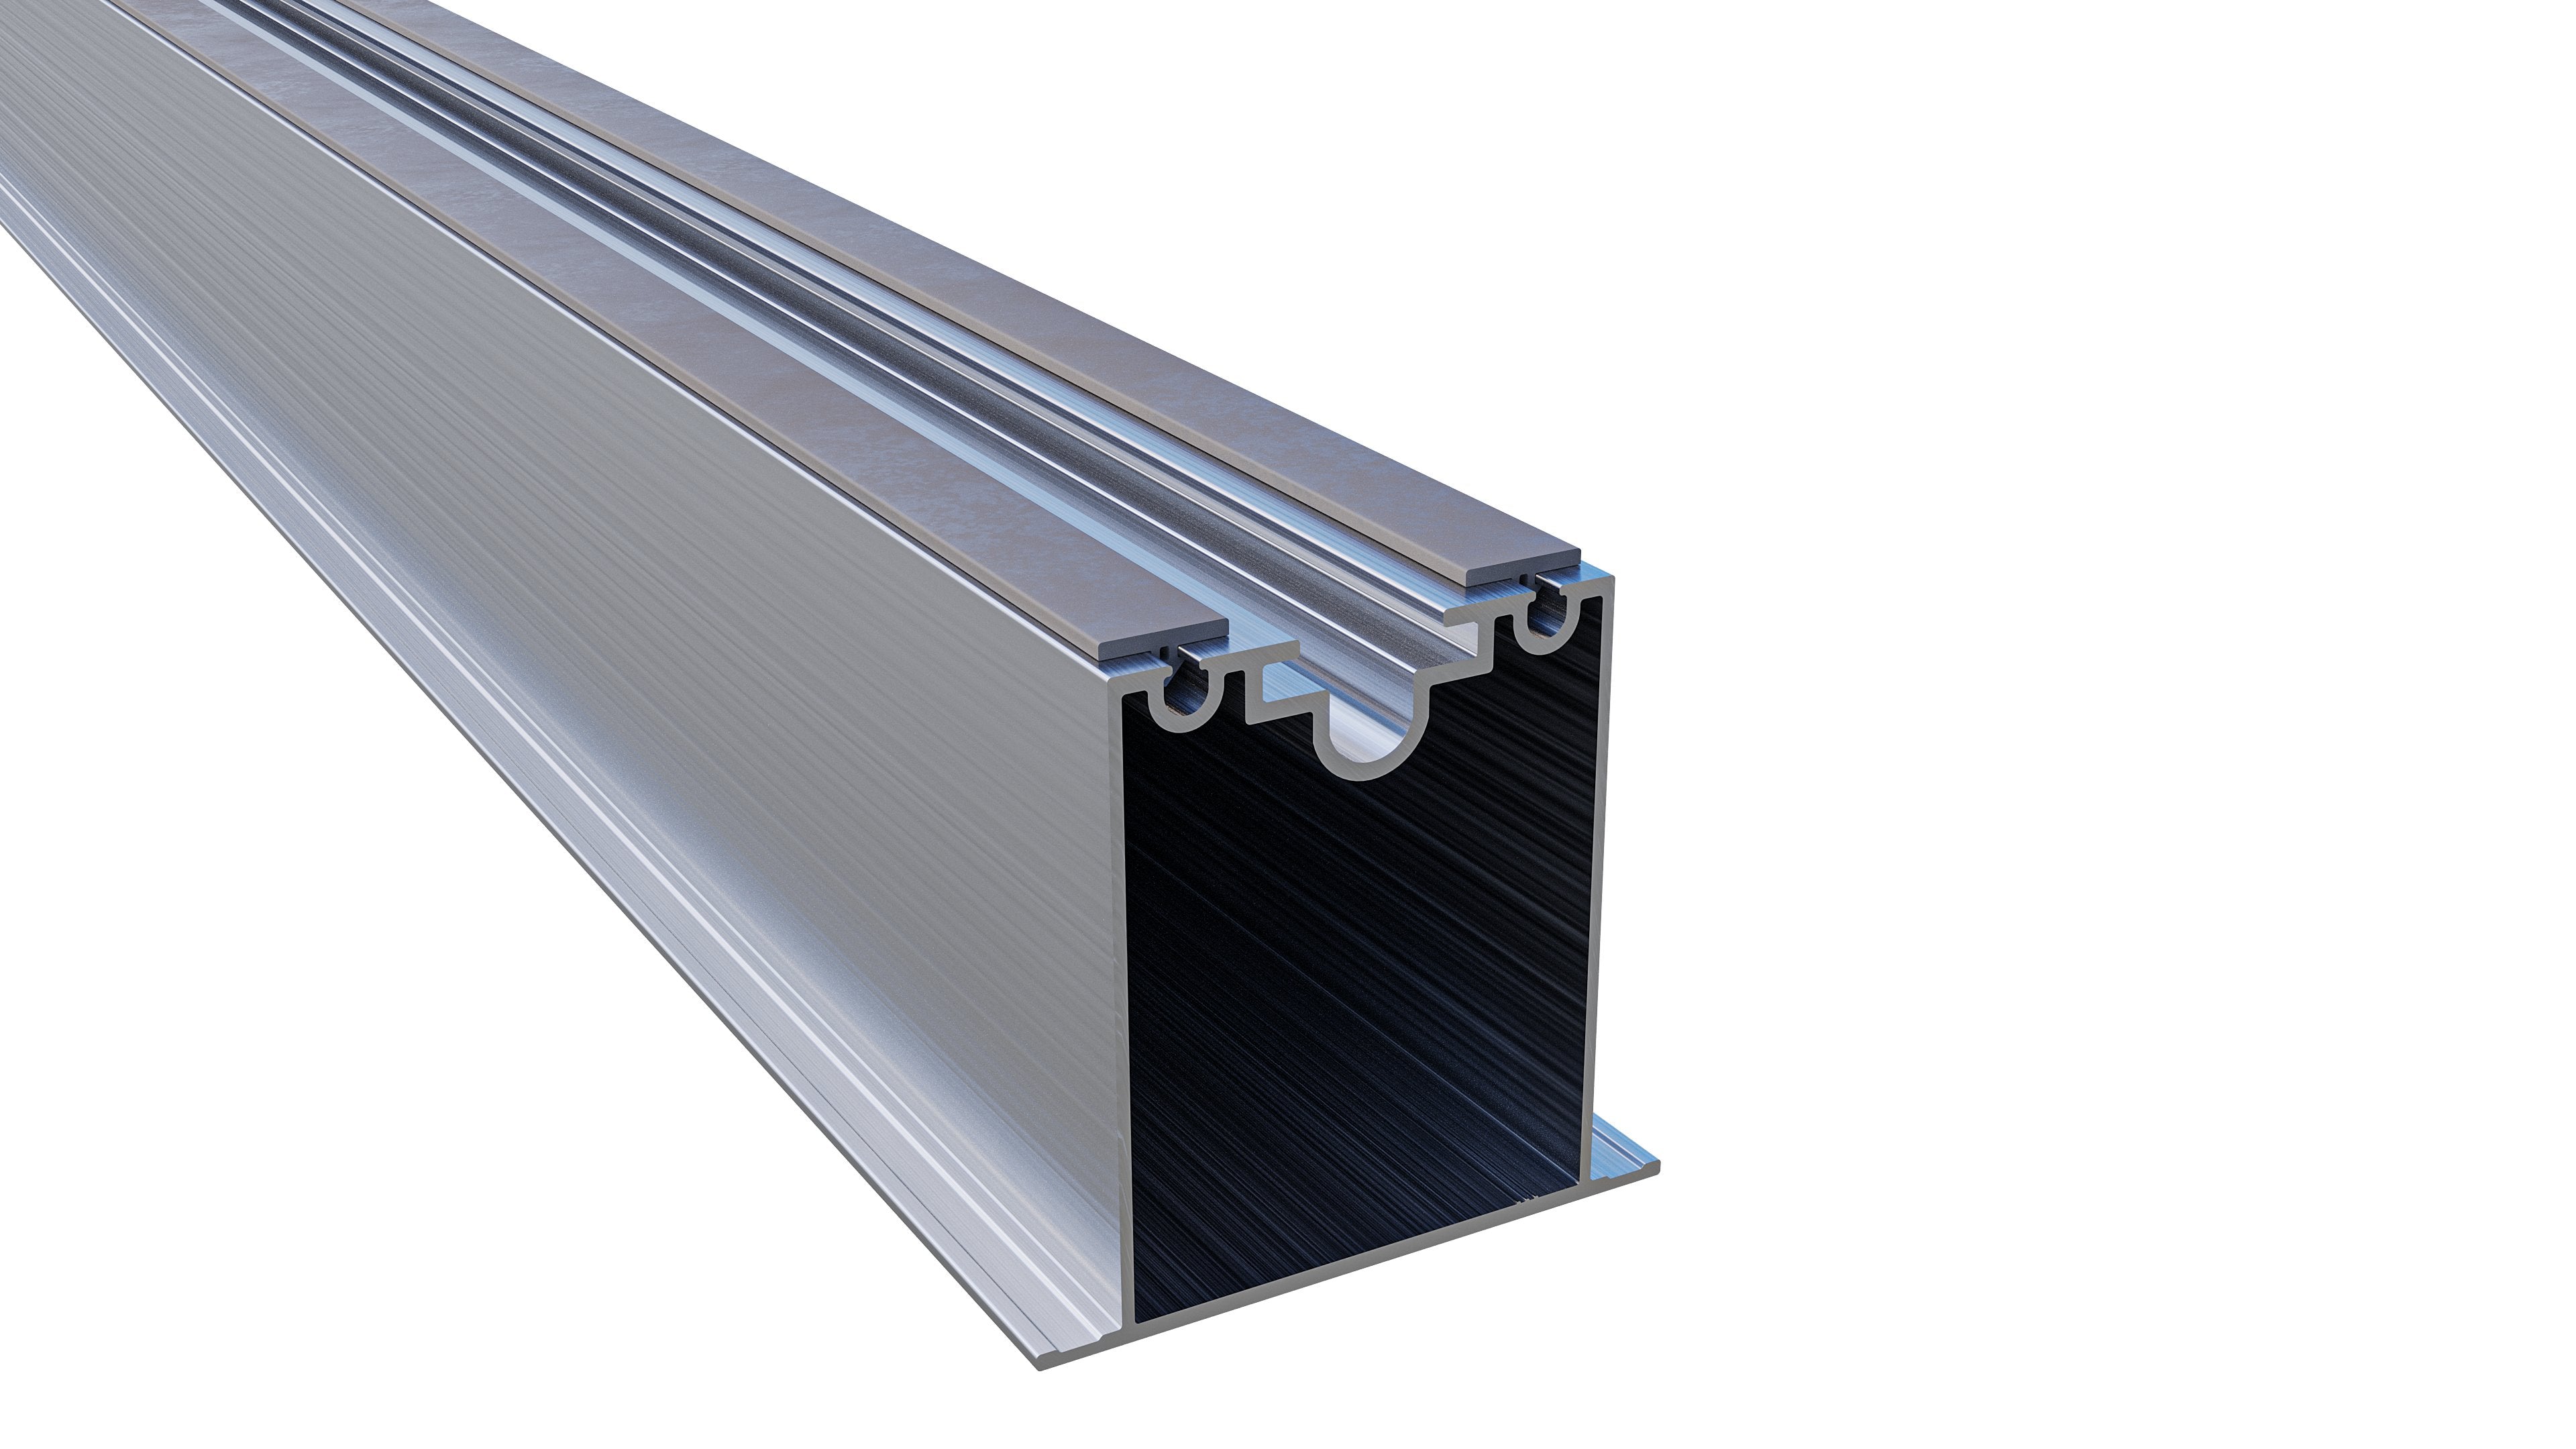 Tectonic® 75mm Aluminium Paving Subframe Top Rail, with 2mm rubber gasket (3.6m length)